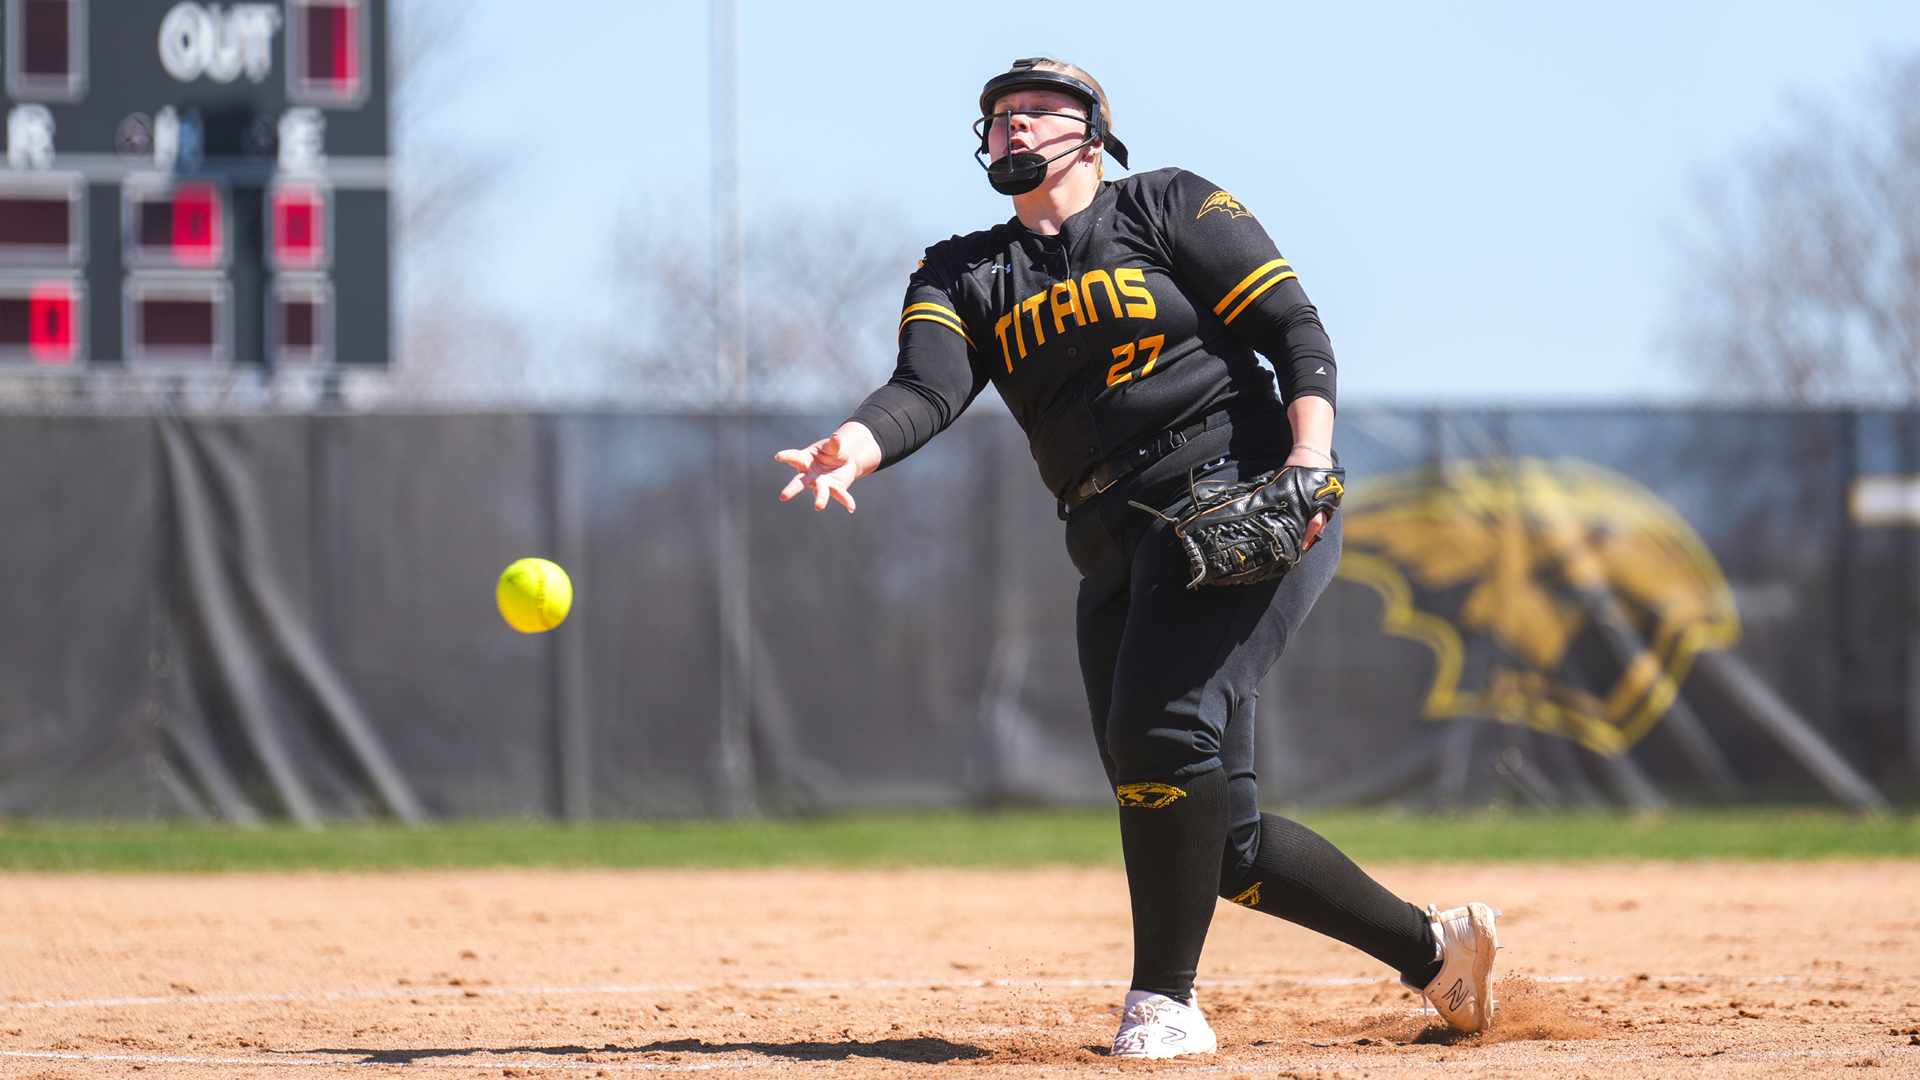 Sydney Nemetz struck out eight batters across all five innings of the Titans' 13-2 win over UW-Whitewater on Wednesday. Photo Credit: Steve Frommell, UW-Oshkosh Sports Information